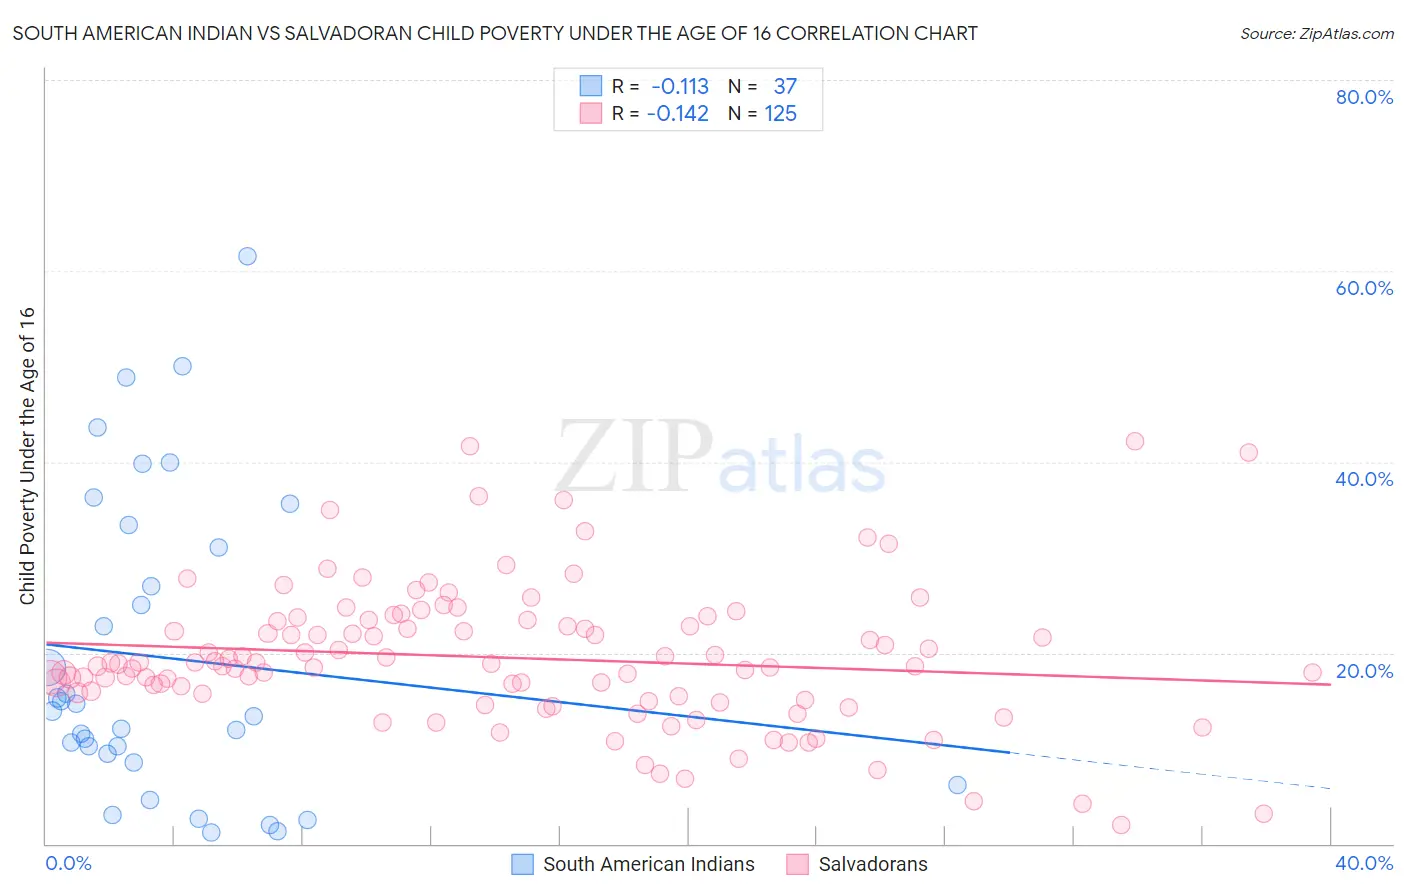 South American Indian vs Salvadoran Child Poverty Under the Age of 16